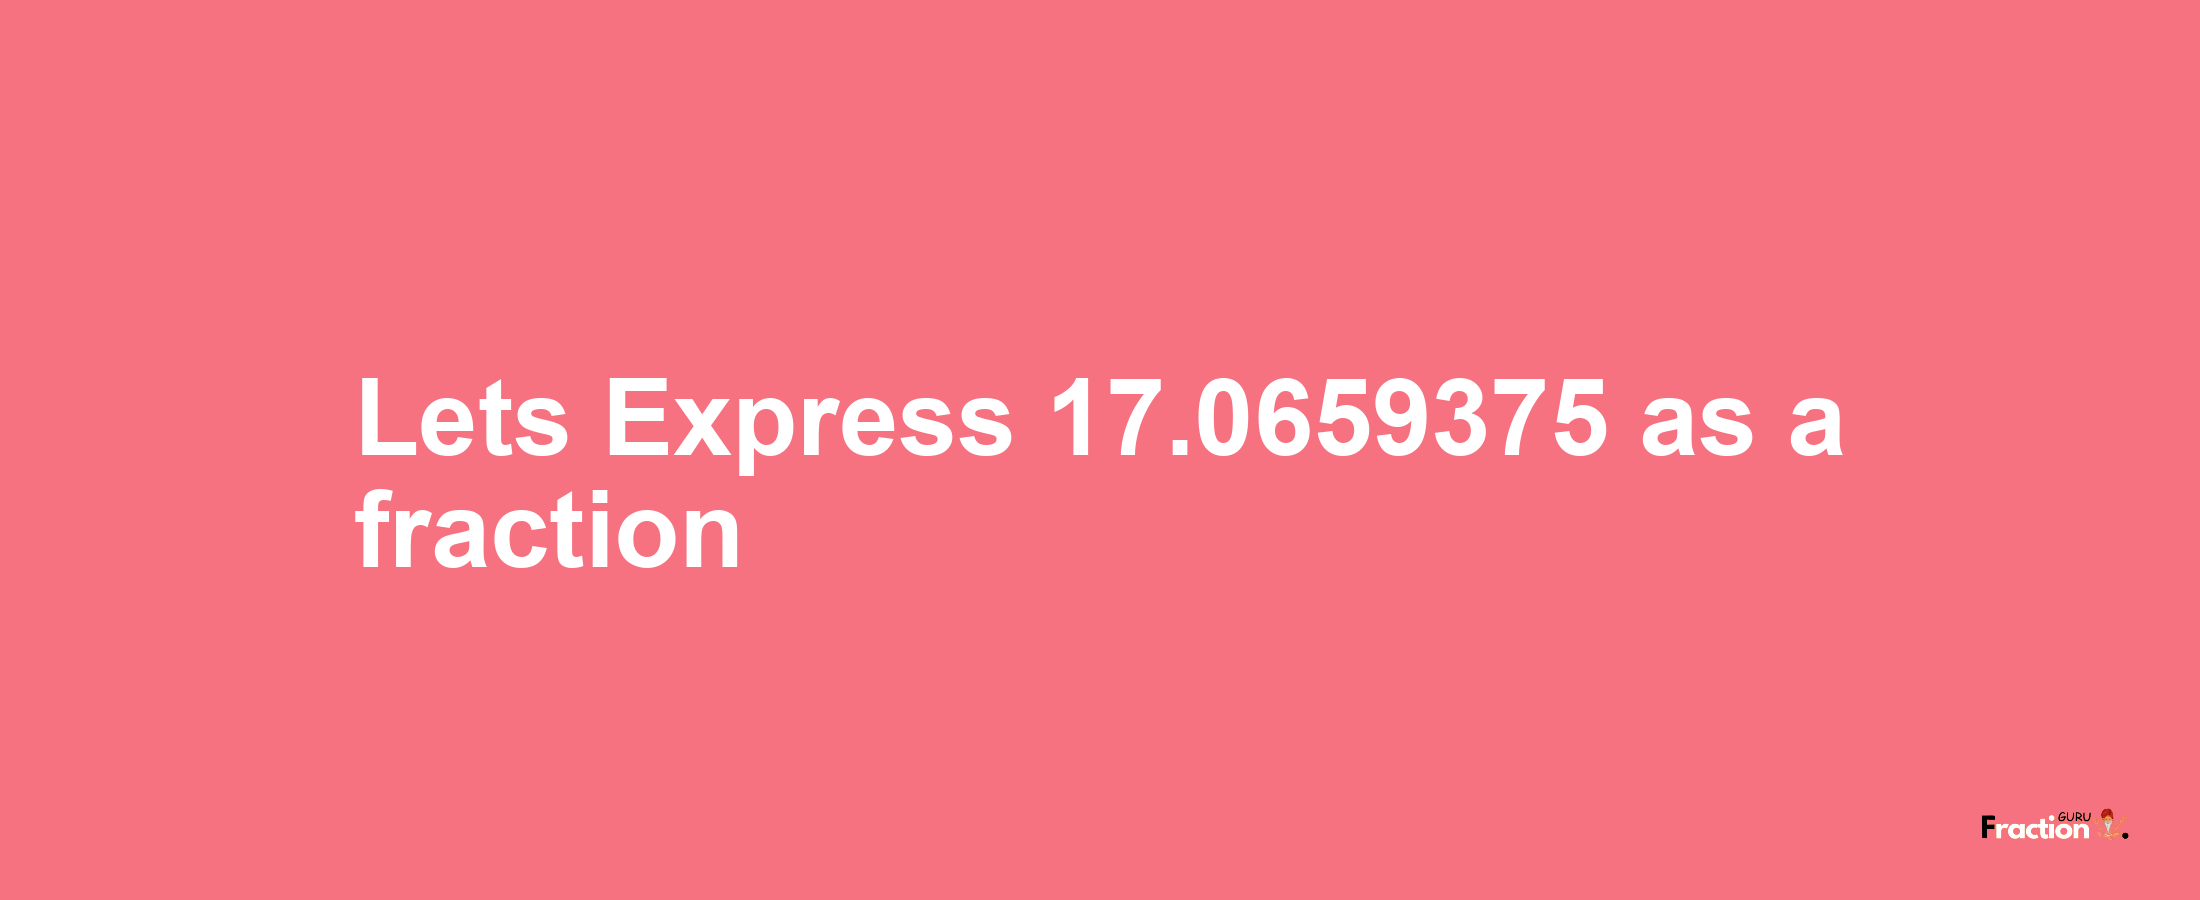 Lets Express 17.0659375 as afraction